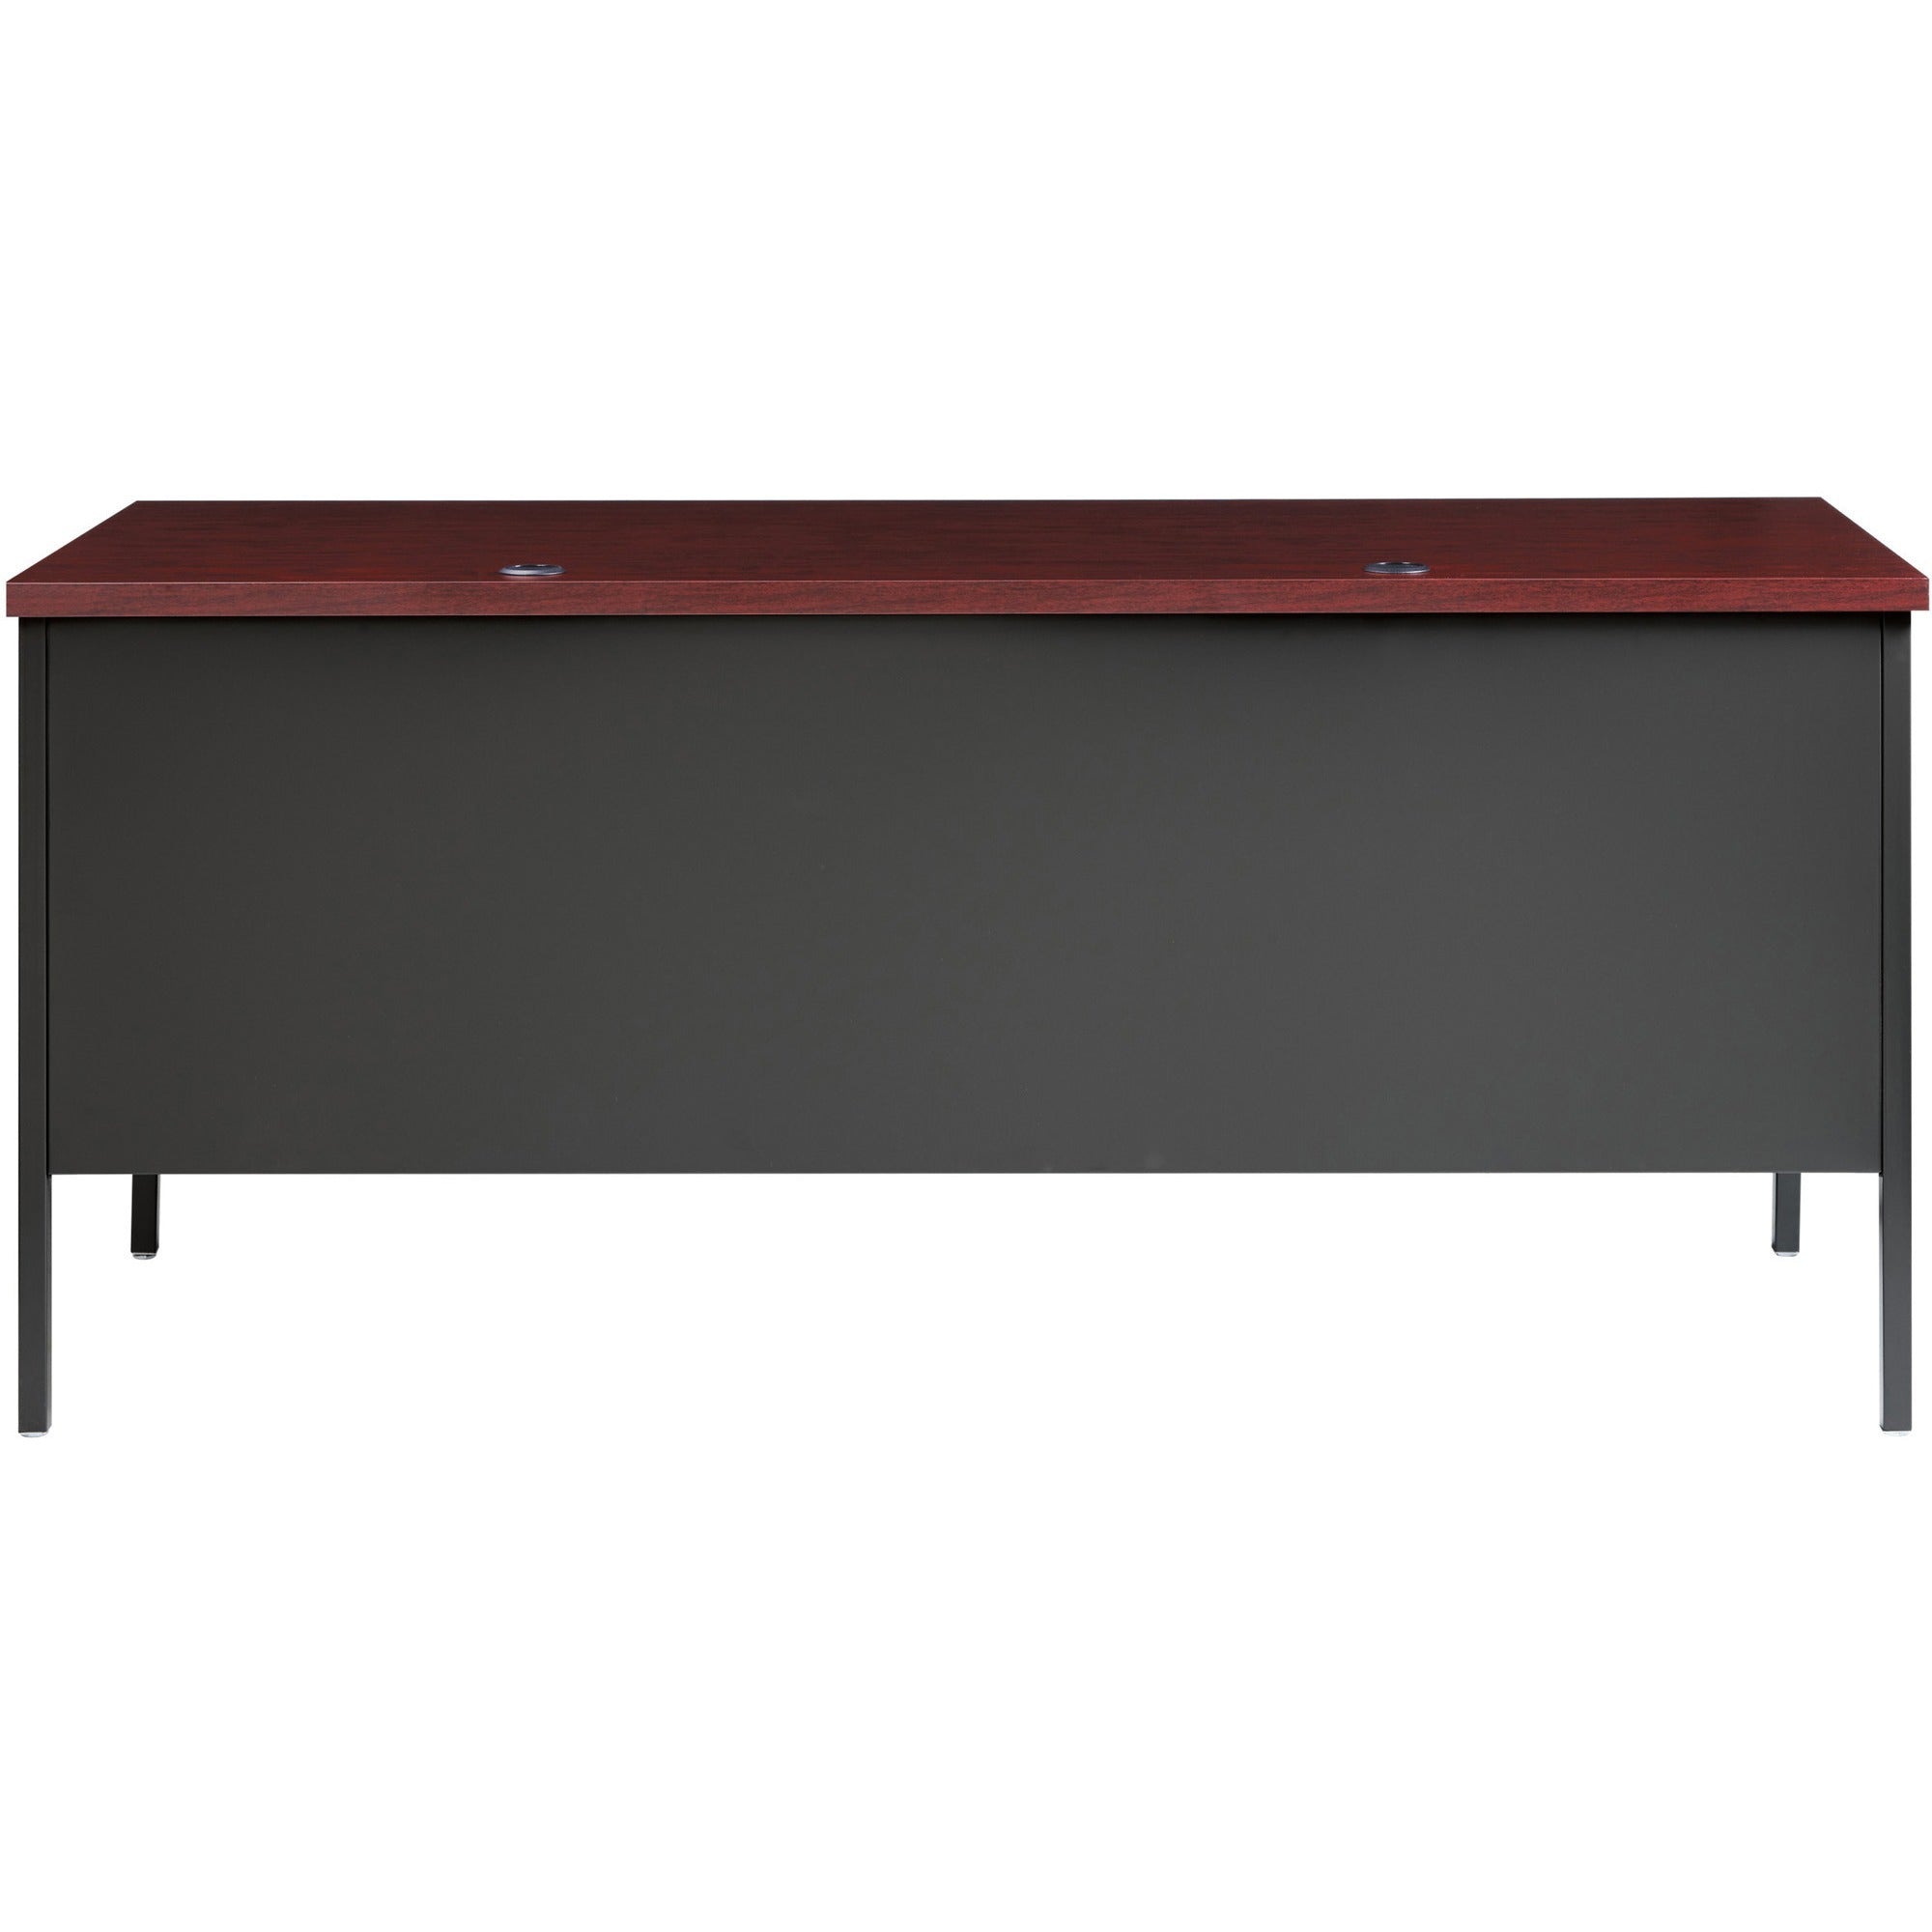 lorell-fortress-series-left-pedestal-desk-for-table-toprectangle-top-x-66-table-top-width-x-30-table-top-depth-x-112-table-top-thickness-2950-height-assembly-required-laminated-mahogany-steel-1-each_llr60919 - 4